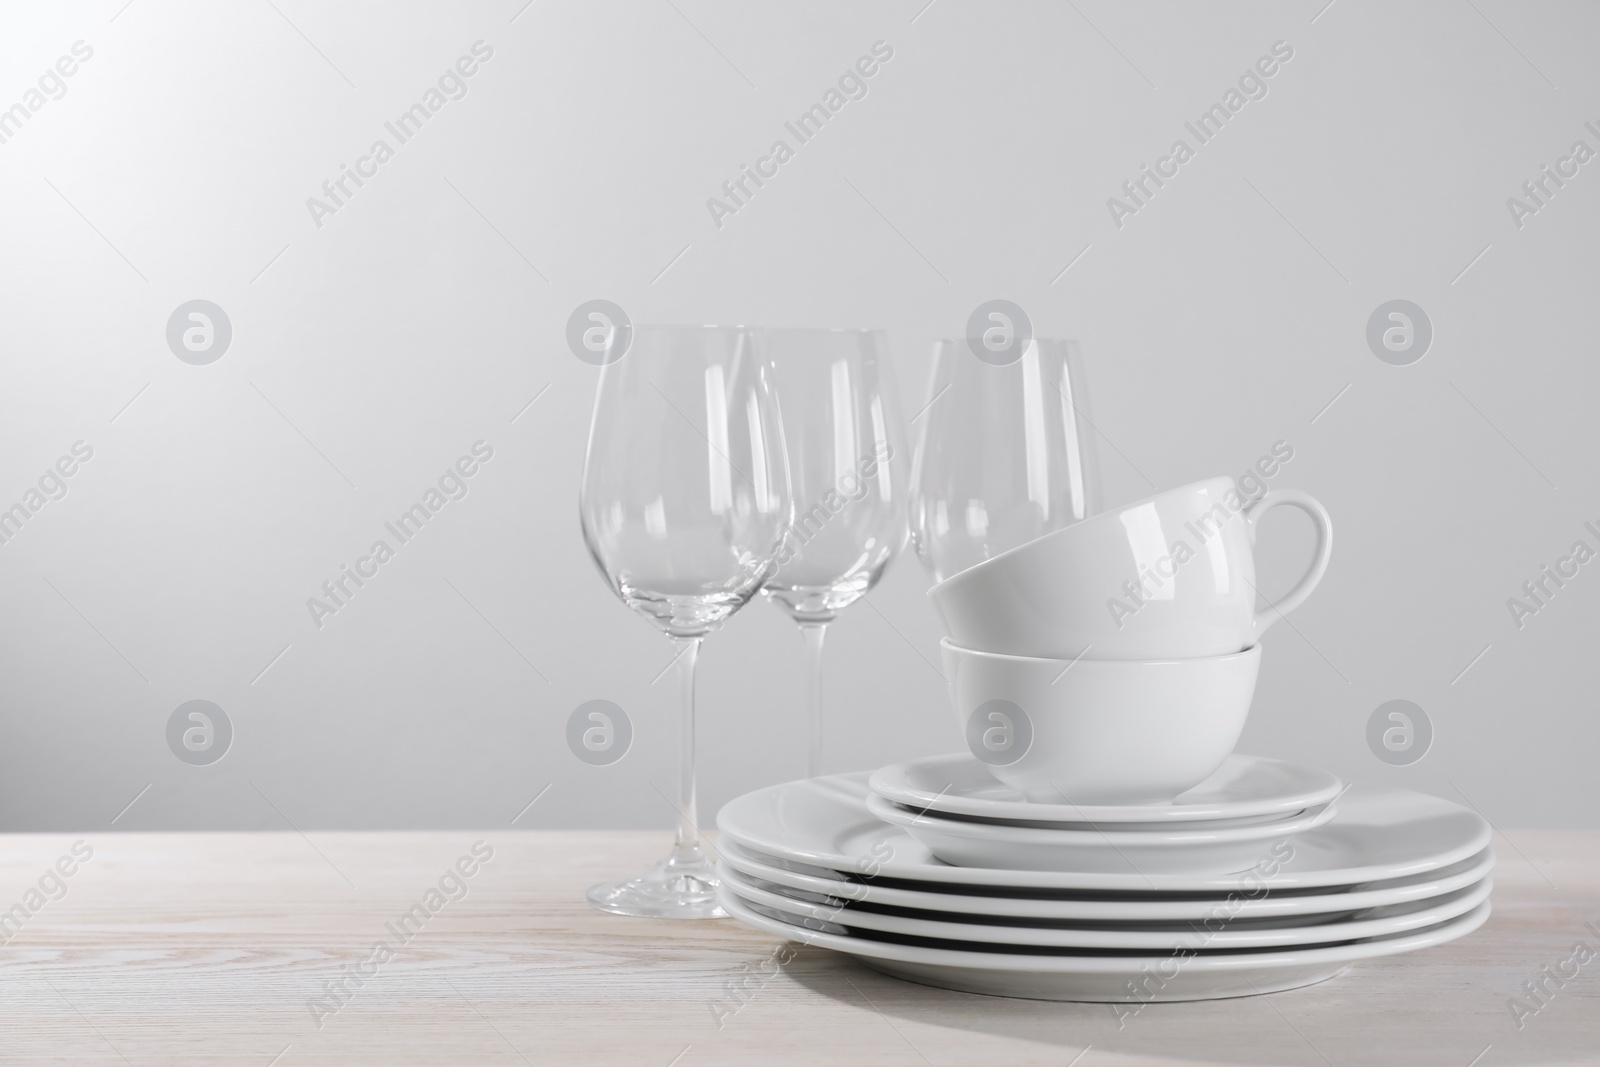 Photo of Set of clean dishware and glasses on white wooden table against light background. Space for text